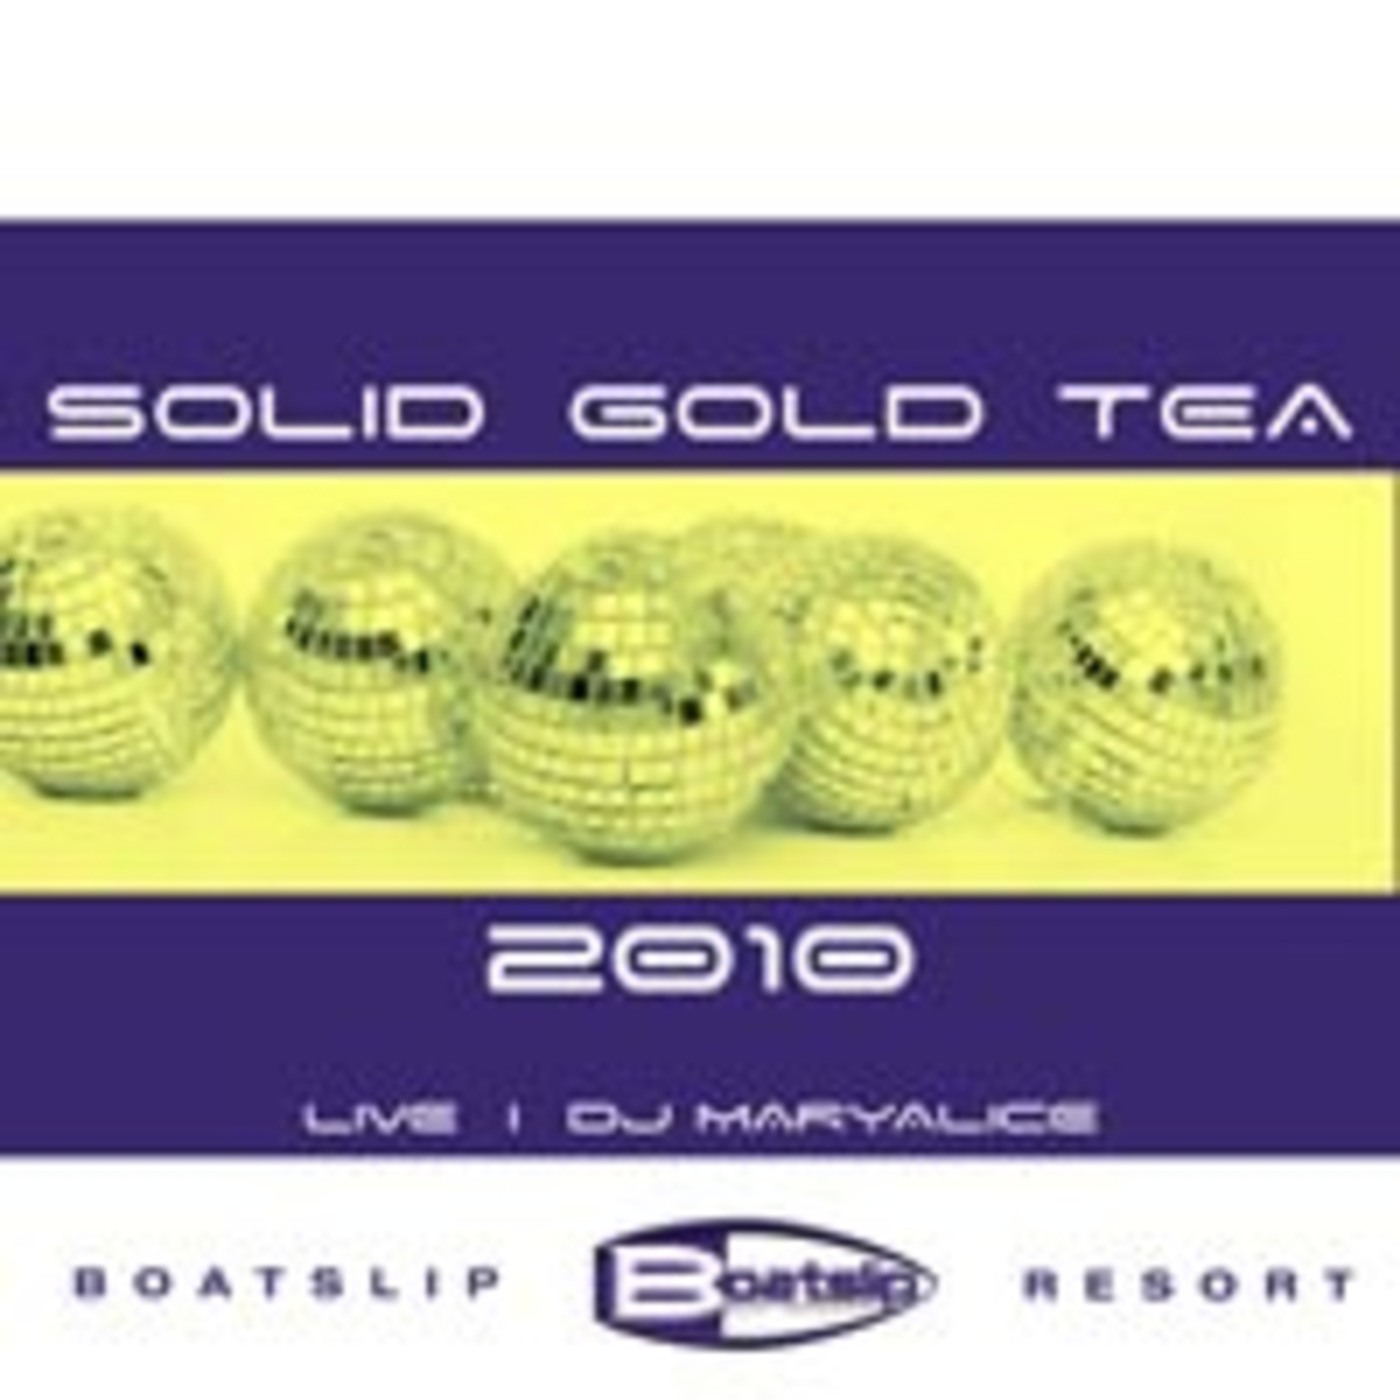 Live at the Boatslip Resort : Solid Gold 2010 Part 2